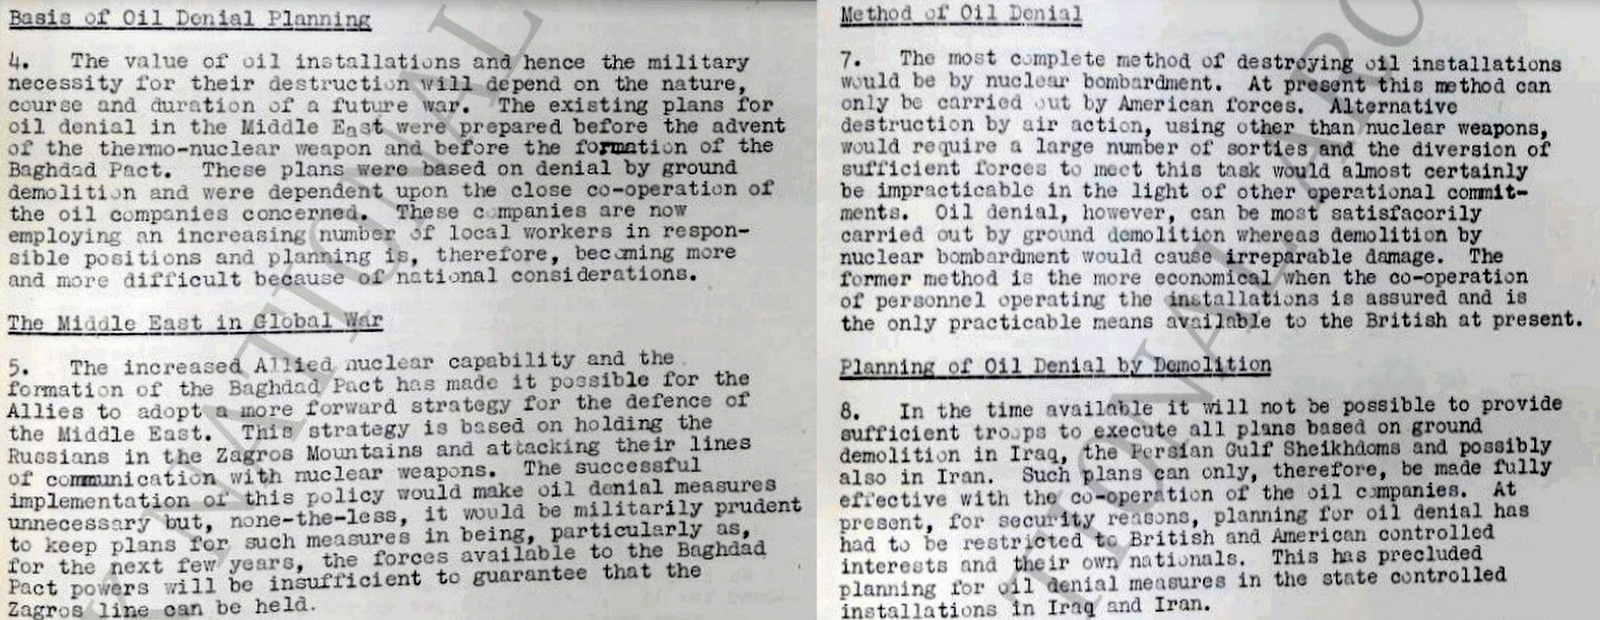 Declassified Documents Reveal UK Plans to Nuke Middle East